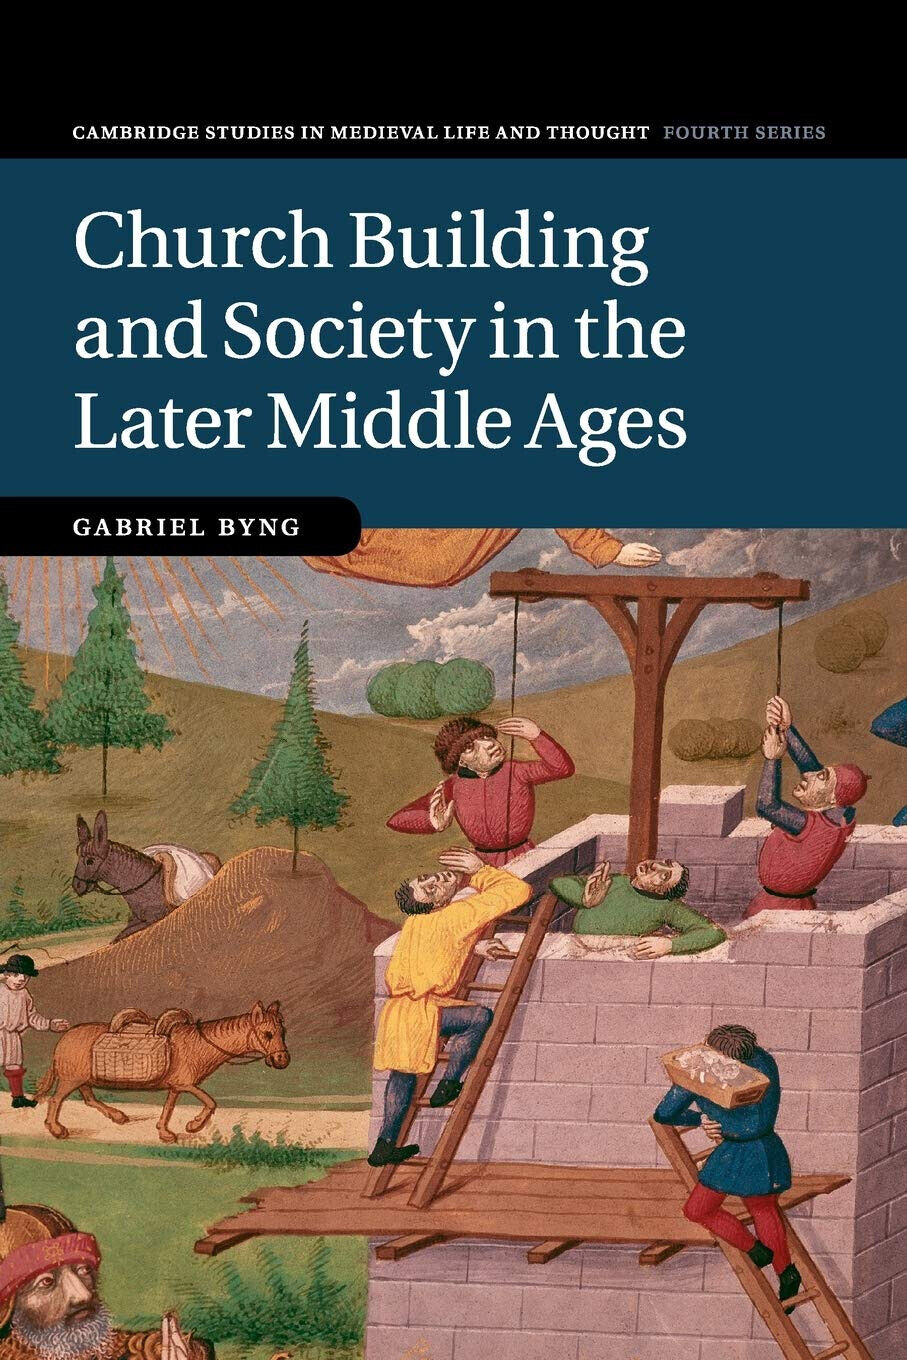 Church Building And Society In The Later Middle Ages - Gabriel Byng - 2020 libro usato